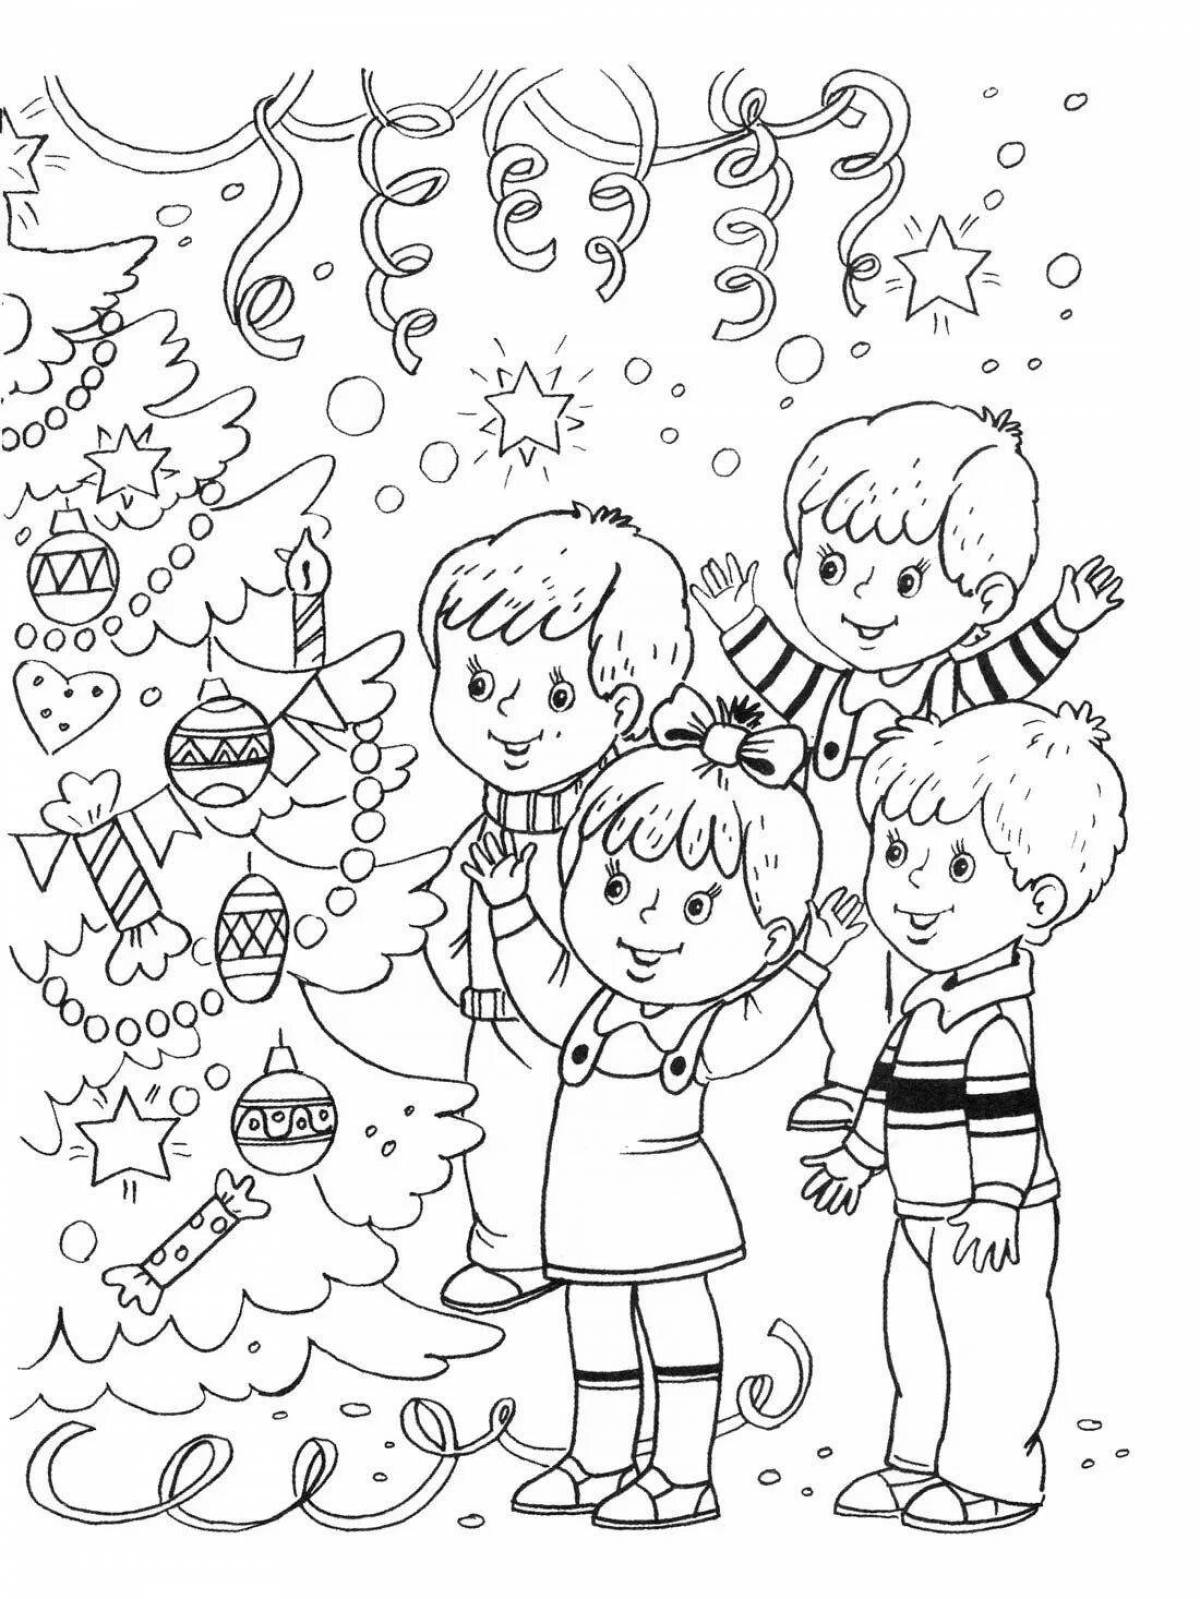 Color-frenzy safe new year coloring page